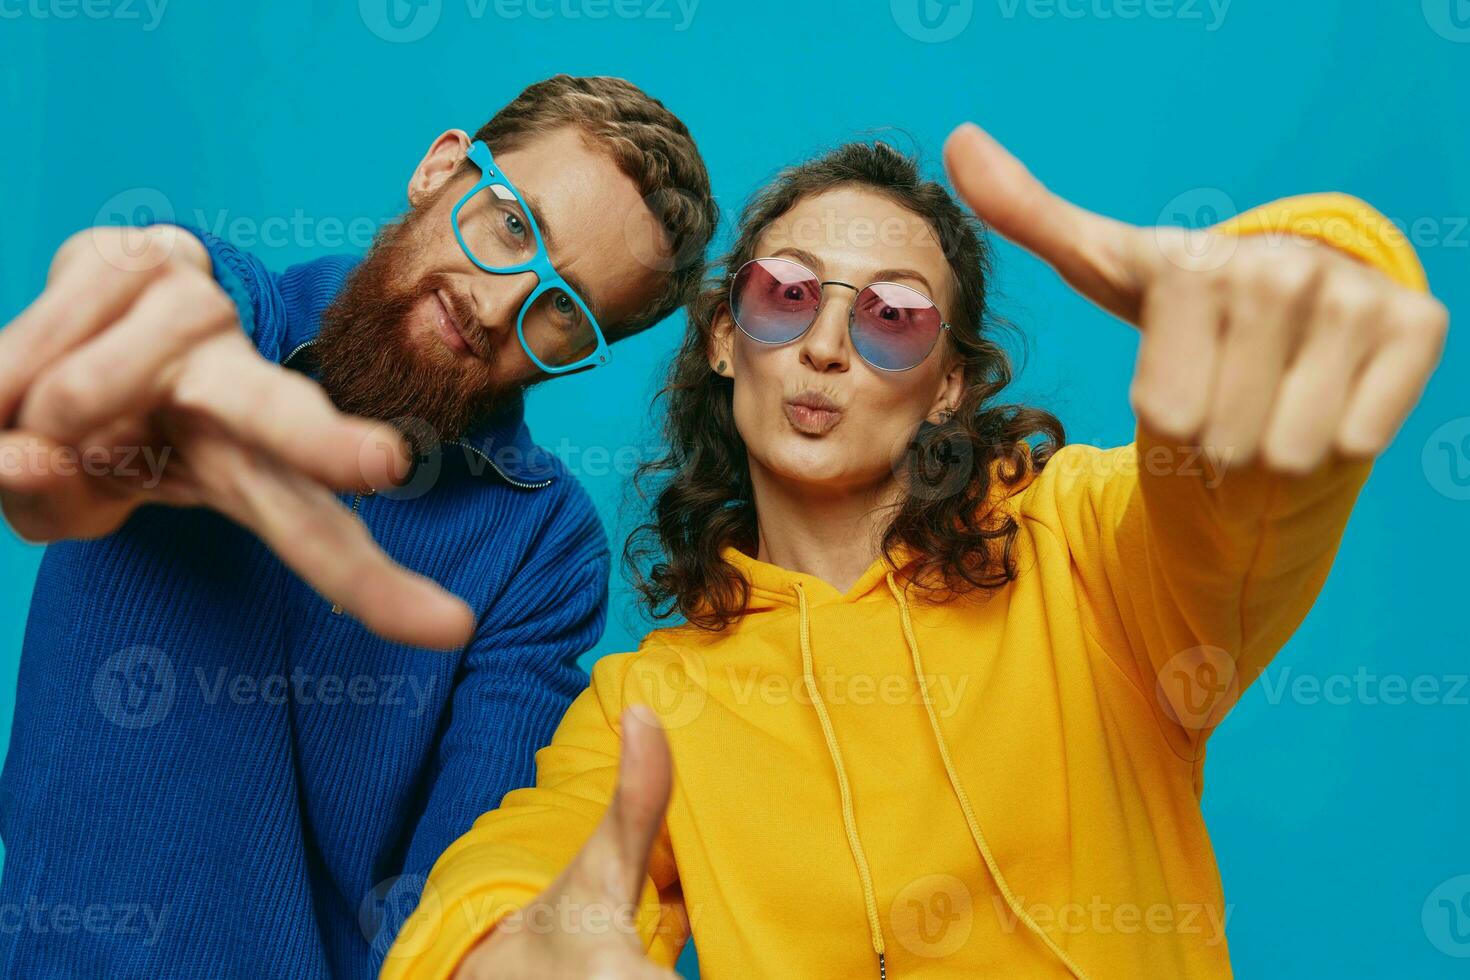 A woman and a man fun couple cranking and showing signs with their hands smiling cheerfully, on a blue background, The concept of a real relationship in a family. photo